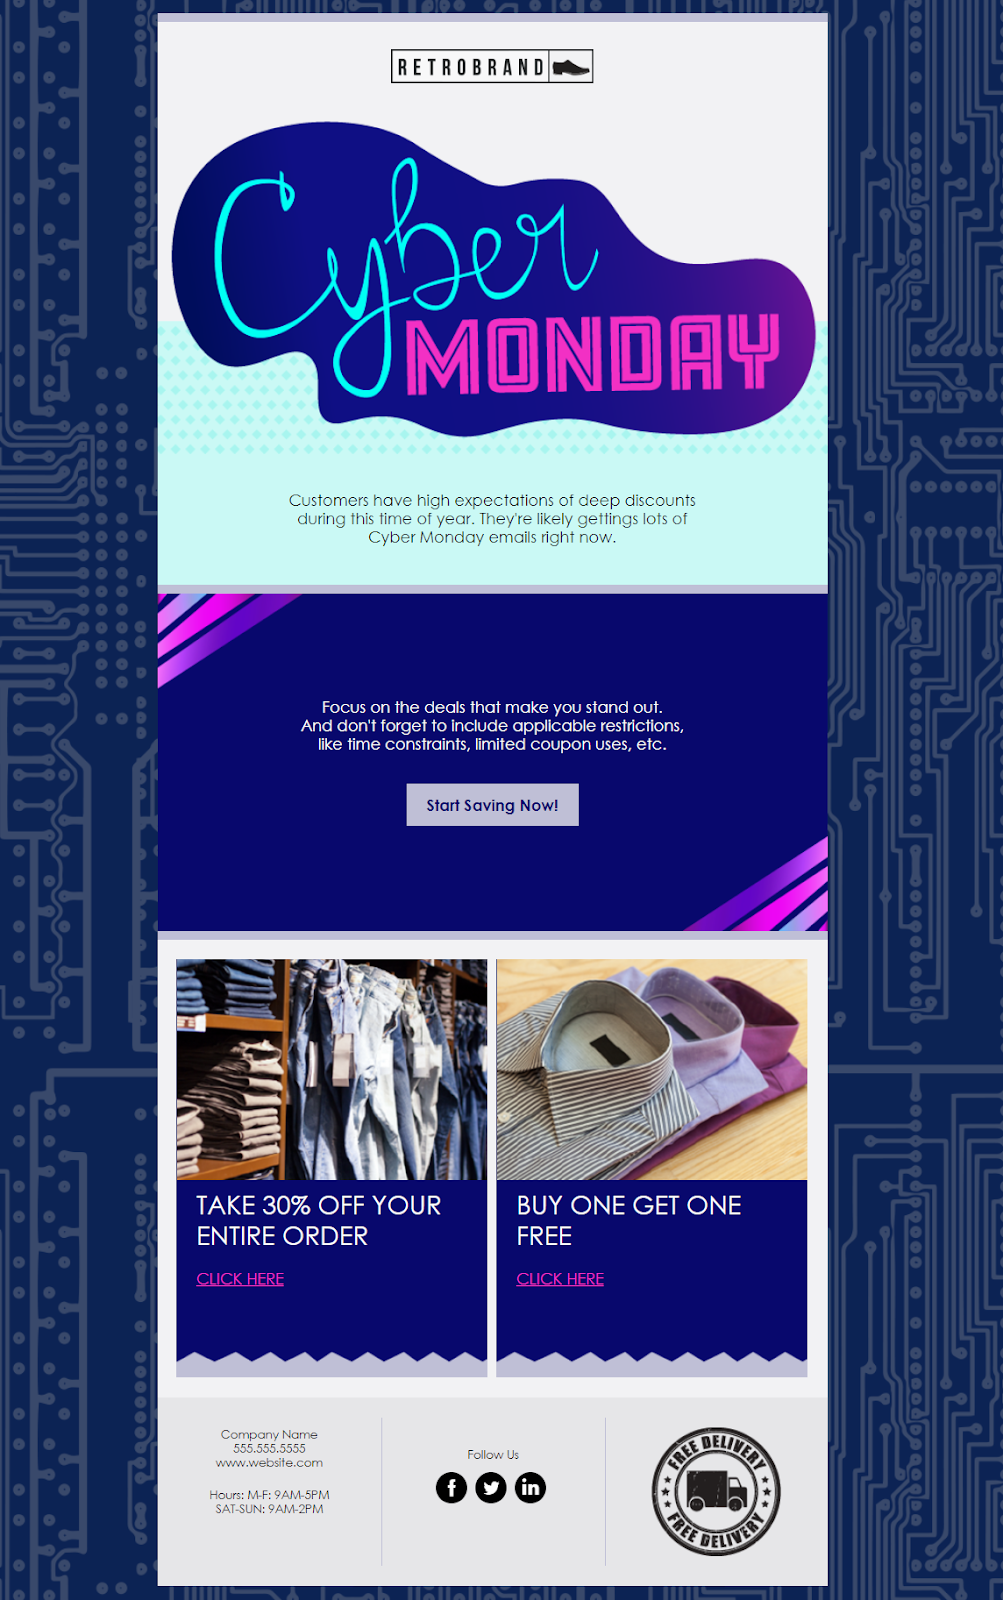 constant contact cyber monday email template is great for an invitation because of its exclusive imagery and background